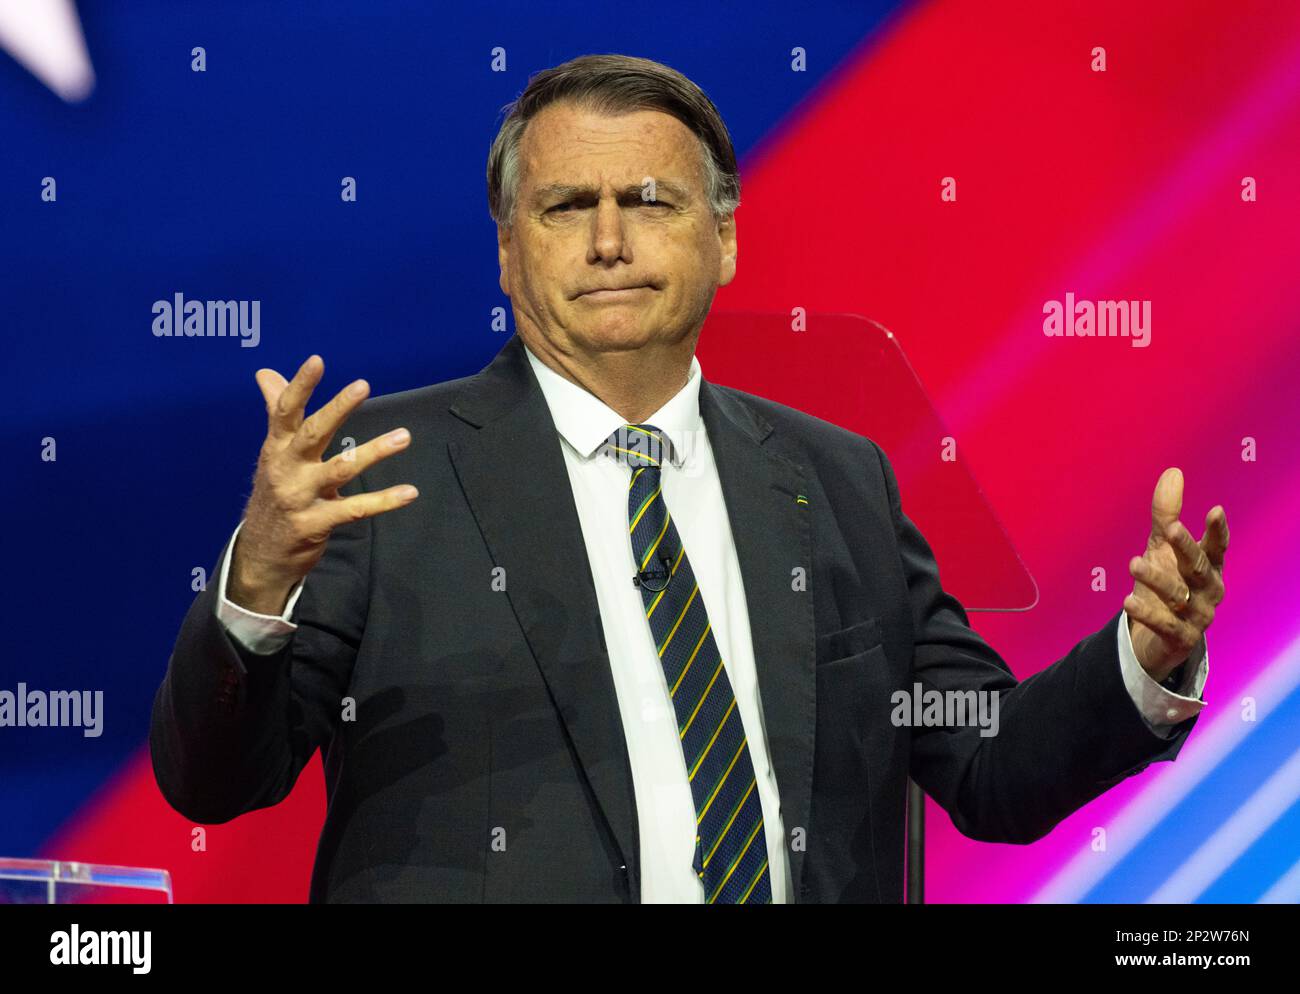 National Harbor Maryland Usa 4th Mar 2023 Jair Bolsonaro 38th President Of Brazil At The 2023 Conservative Political Action Conference Cpac In National Harbor Maryland Us On Saturday March 4 2023 Credit Ron Sachscnpdpaalamy Live News 2P2W76N 